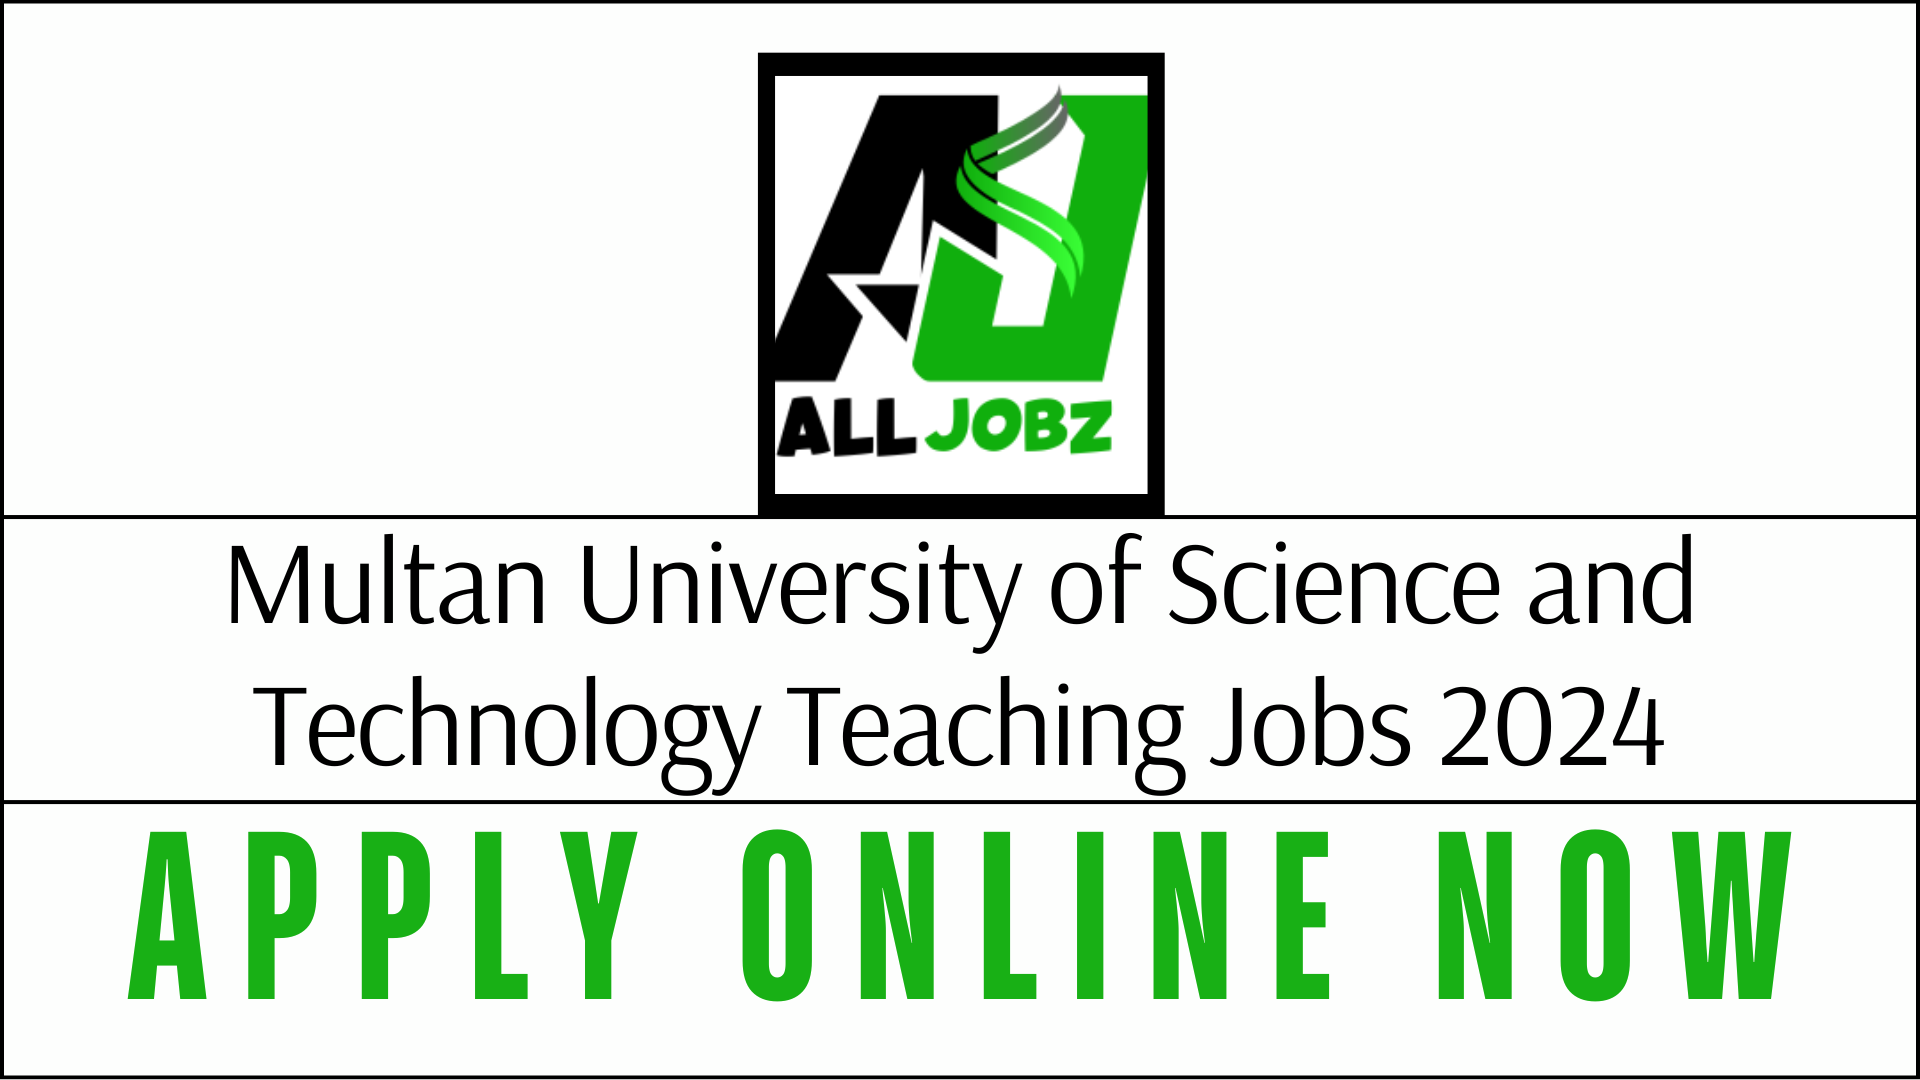 Multan University Of Science And Technology Teaching Jobs 2024, Multan University Of Science And Technology Teaching Jobs 2024 Apply, Multan University Of Science And Technology Jobs, Multan University Of Science And Technology Jobs 2024 Apply Online, Multan University Jobs, Multan University Of Science And Technology Last Date To Apply, Ultan University Of Science And Technology Is Private Or Government,